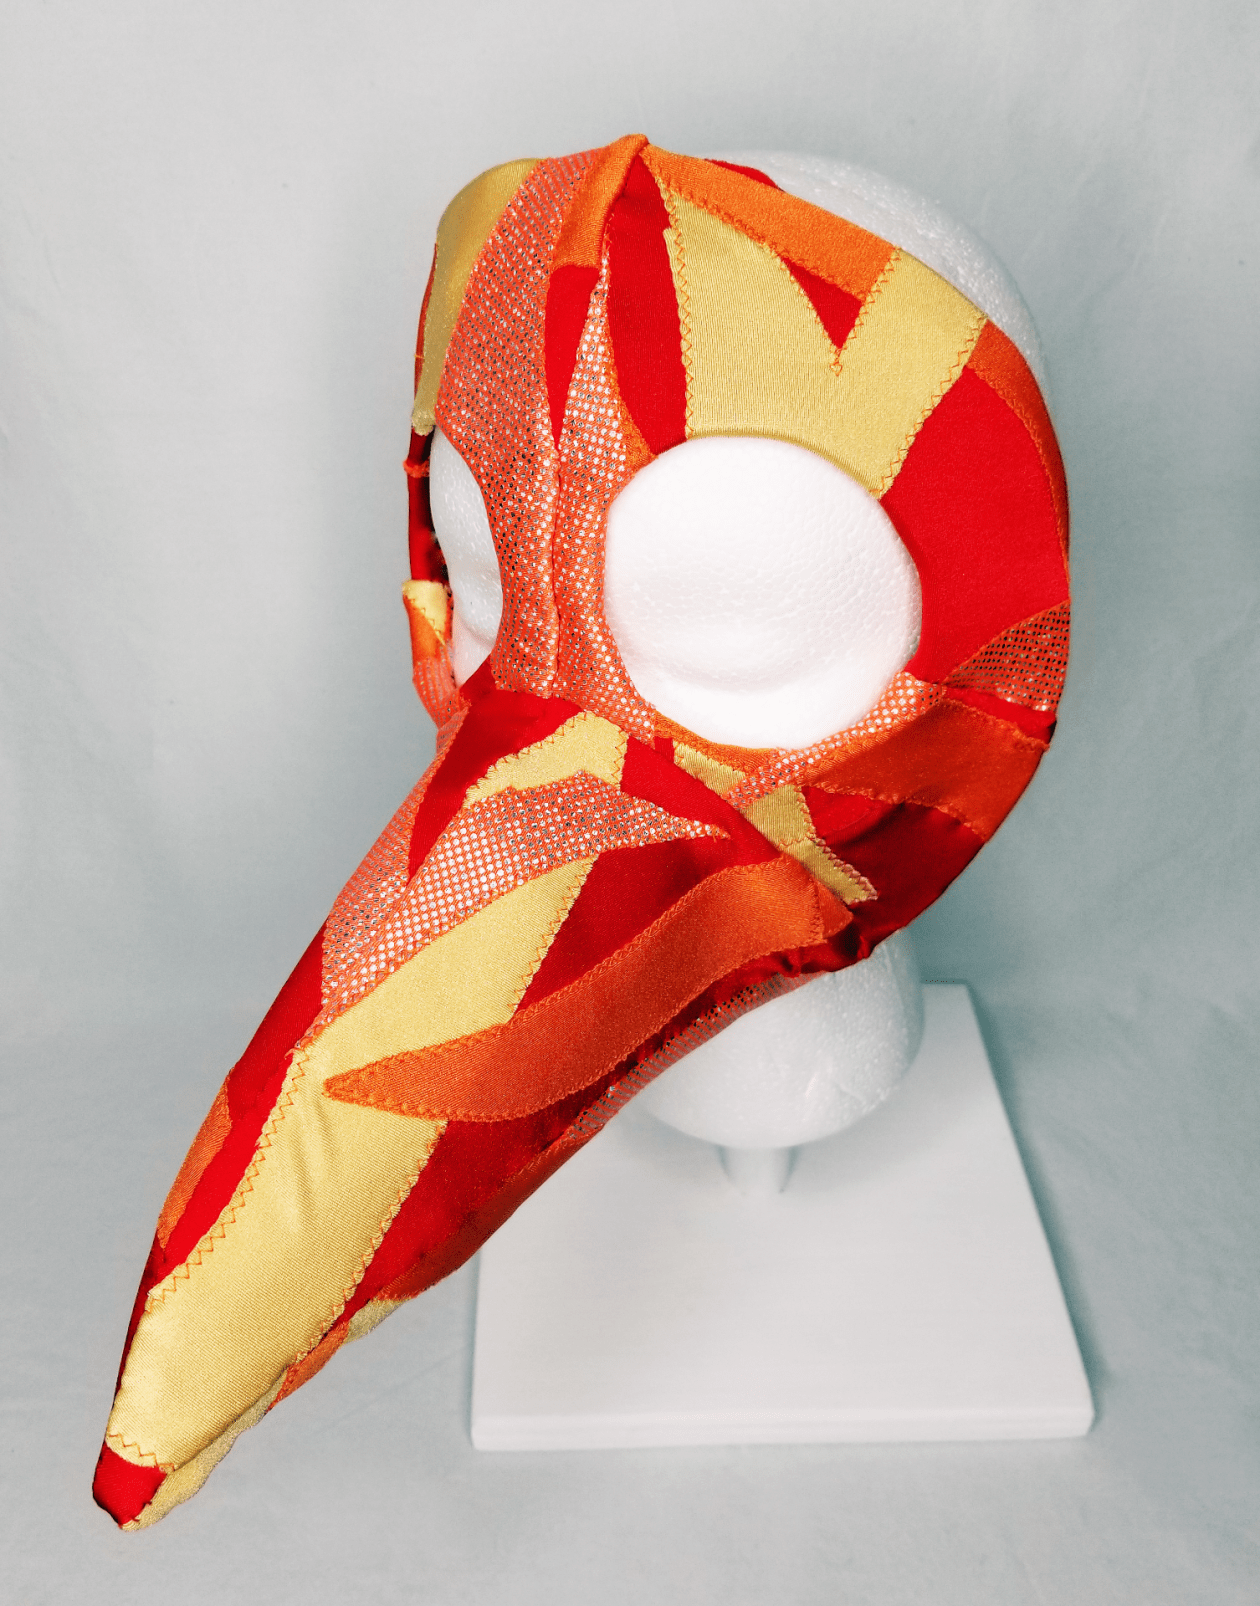 A beaked mask in orange, red, and yellow